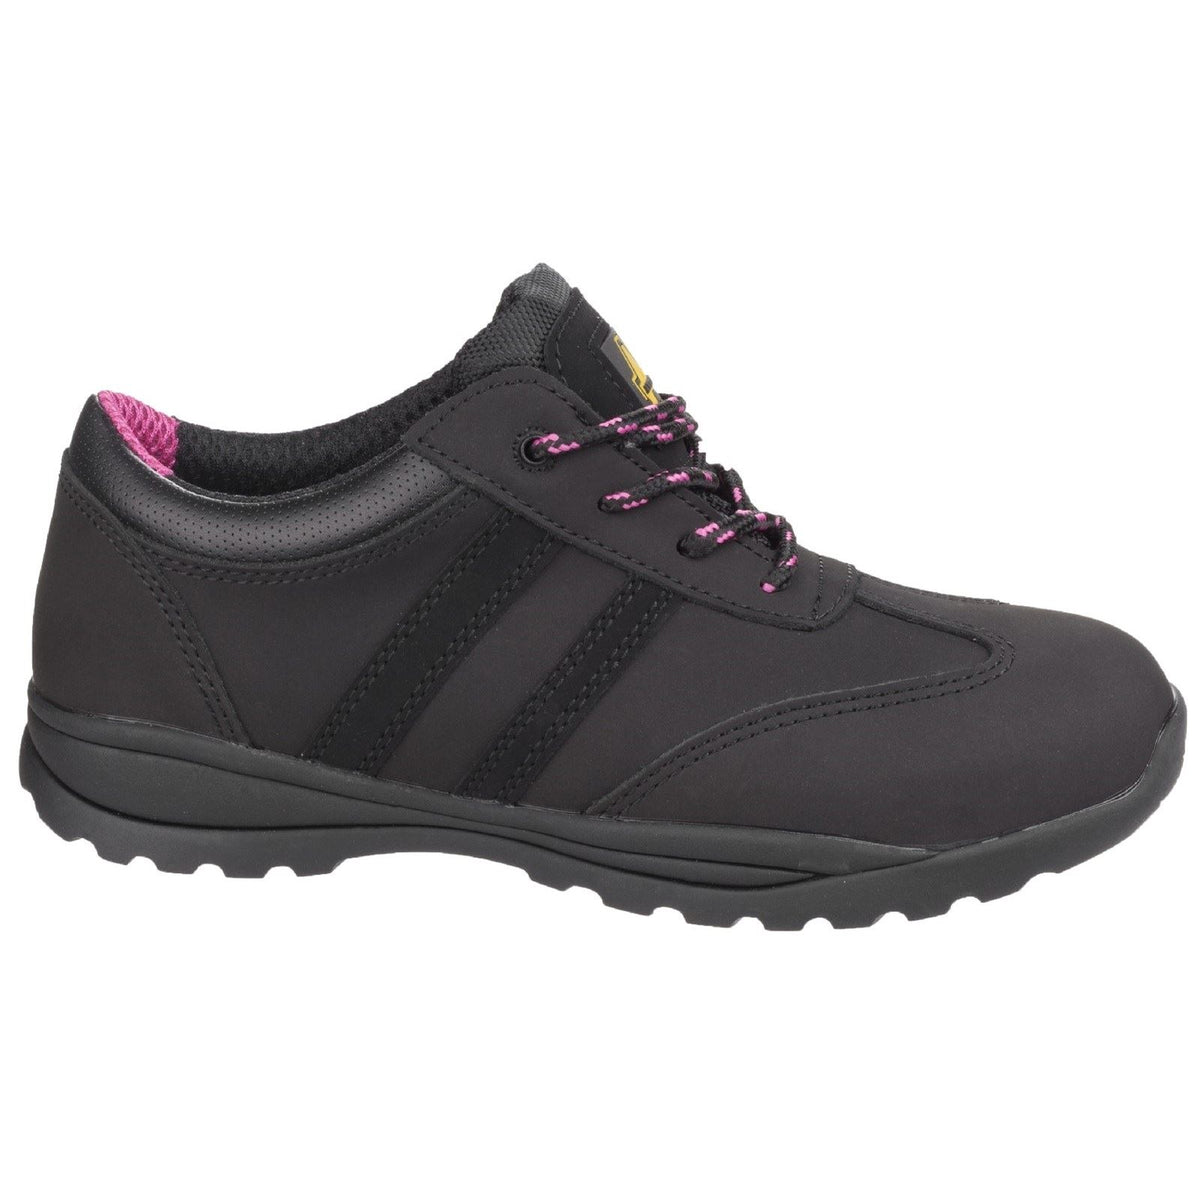 Amblers Safety FS706 Sophie Safety Trainers